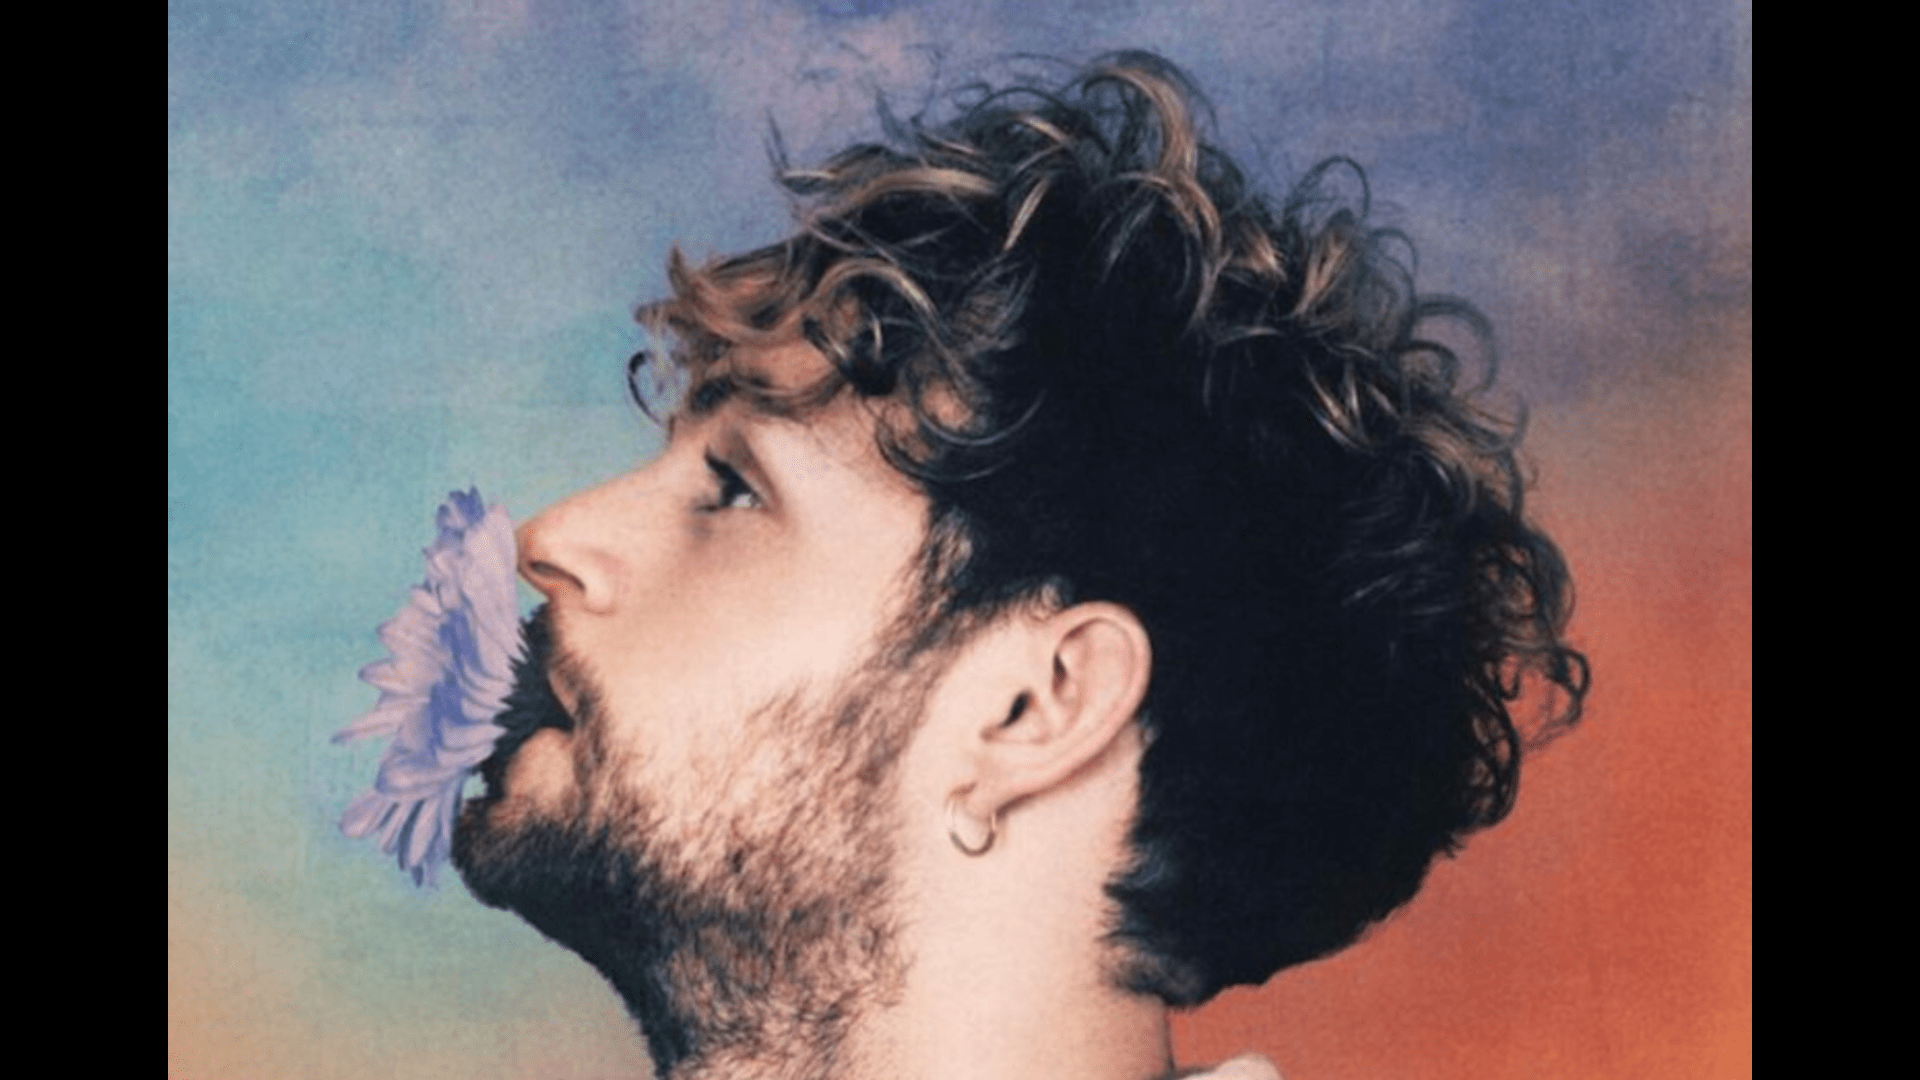 singer-tom-grennan-hospitalized-after-a-robbery-attack